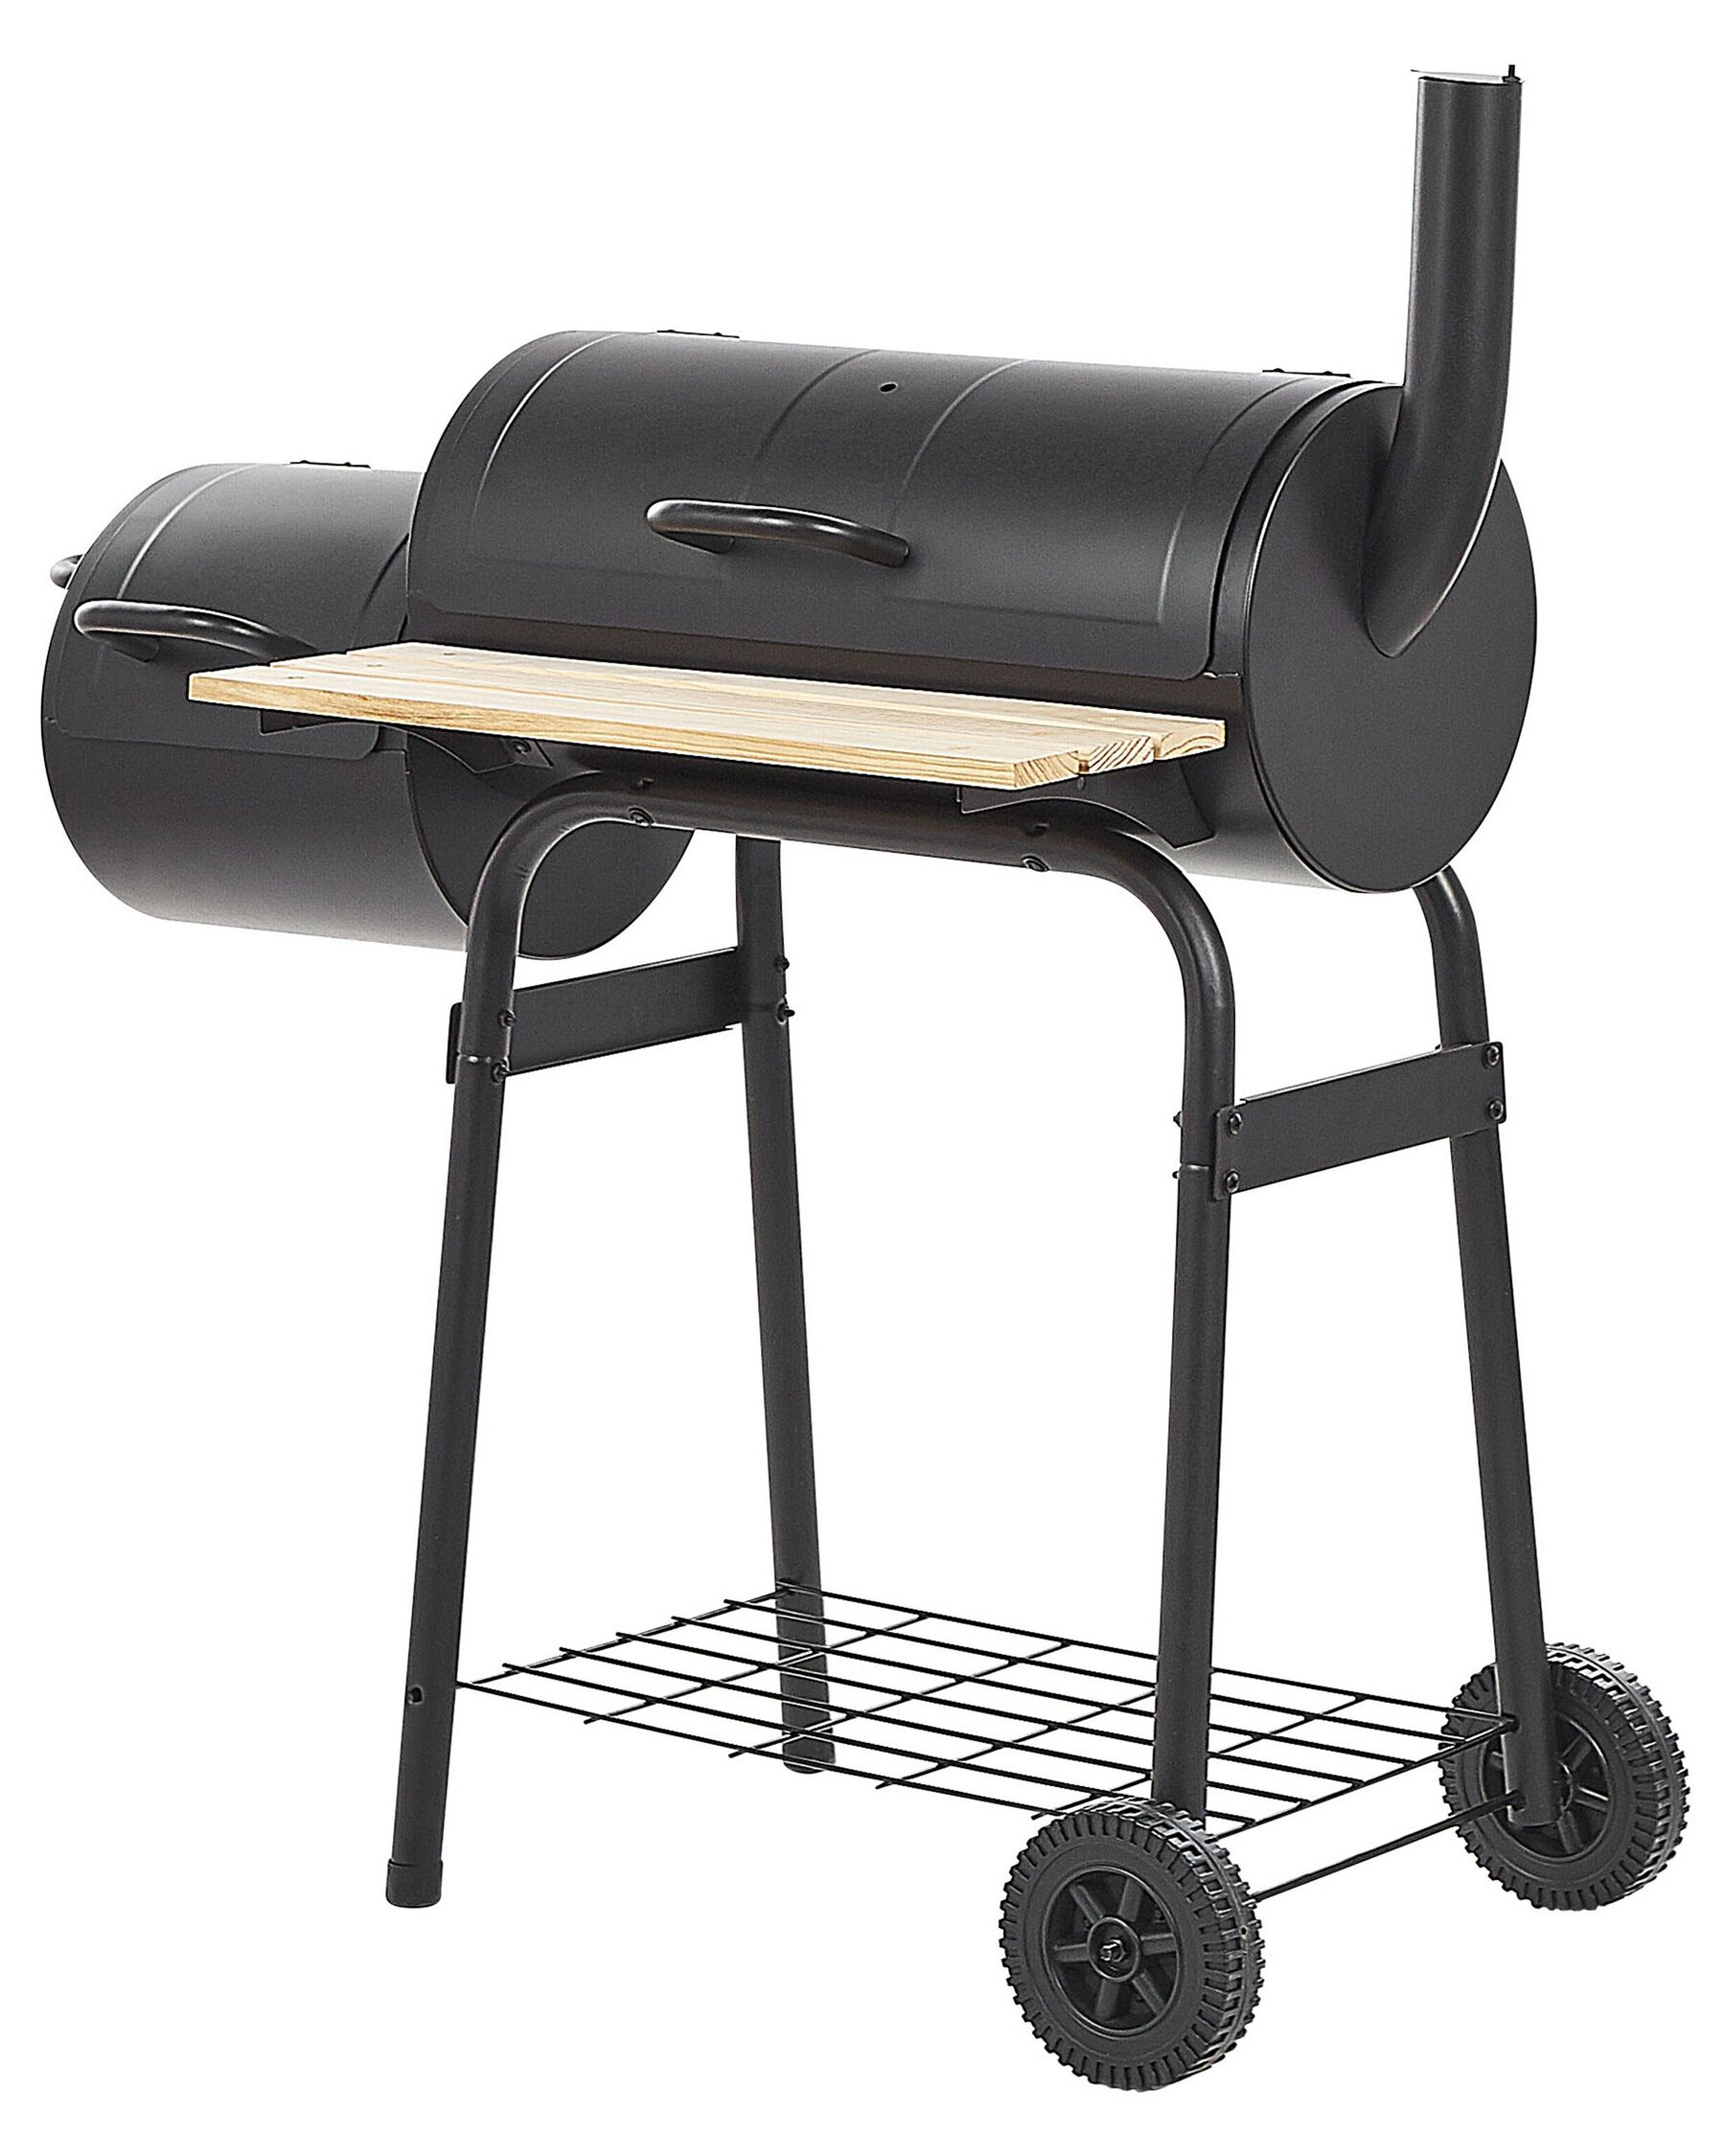 Garden Charcoal BBQ Grill with Lid Wheeled Offset Smoker Function Black Satah